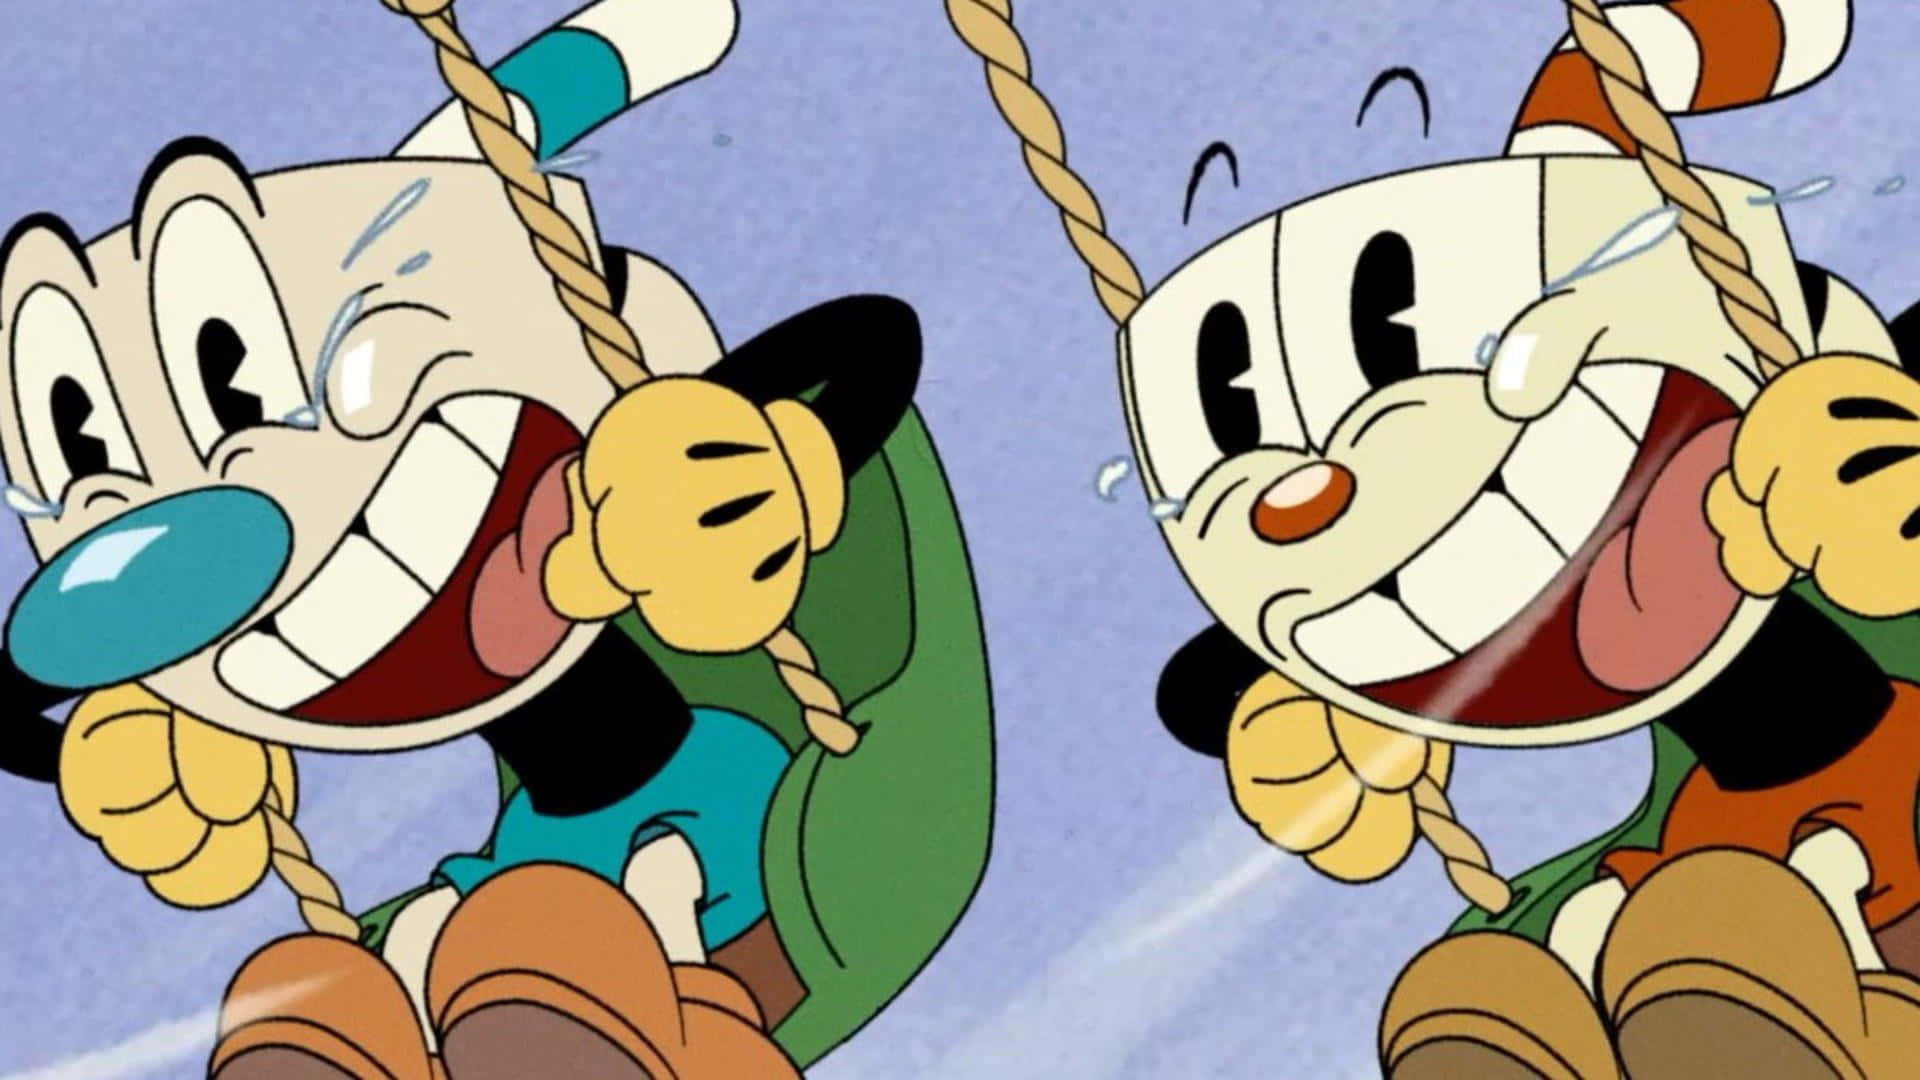 Cuphead: Ready for Nonstop Turbulent Action